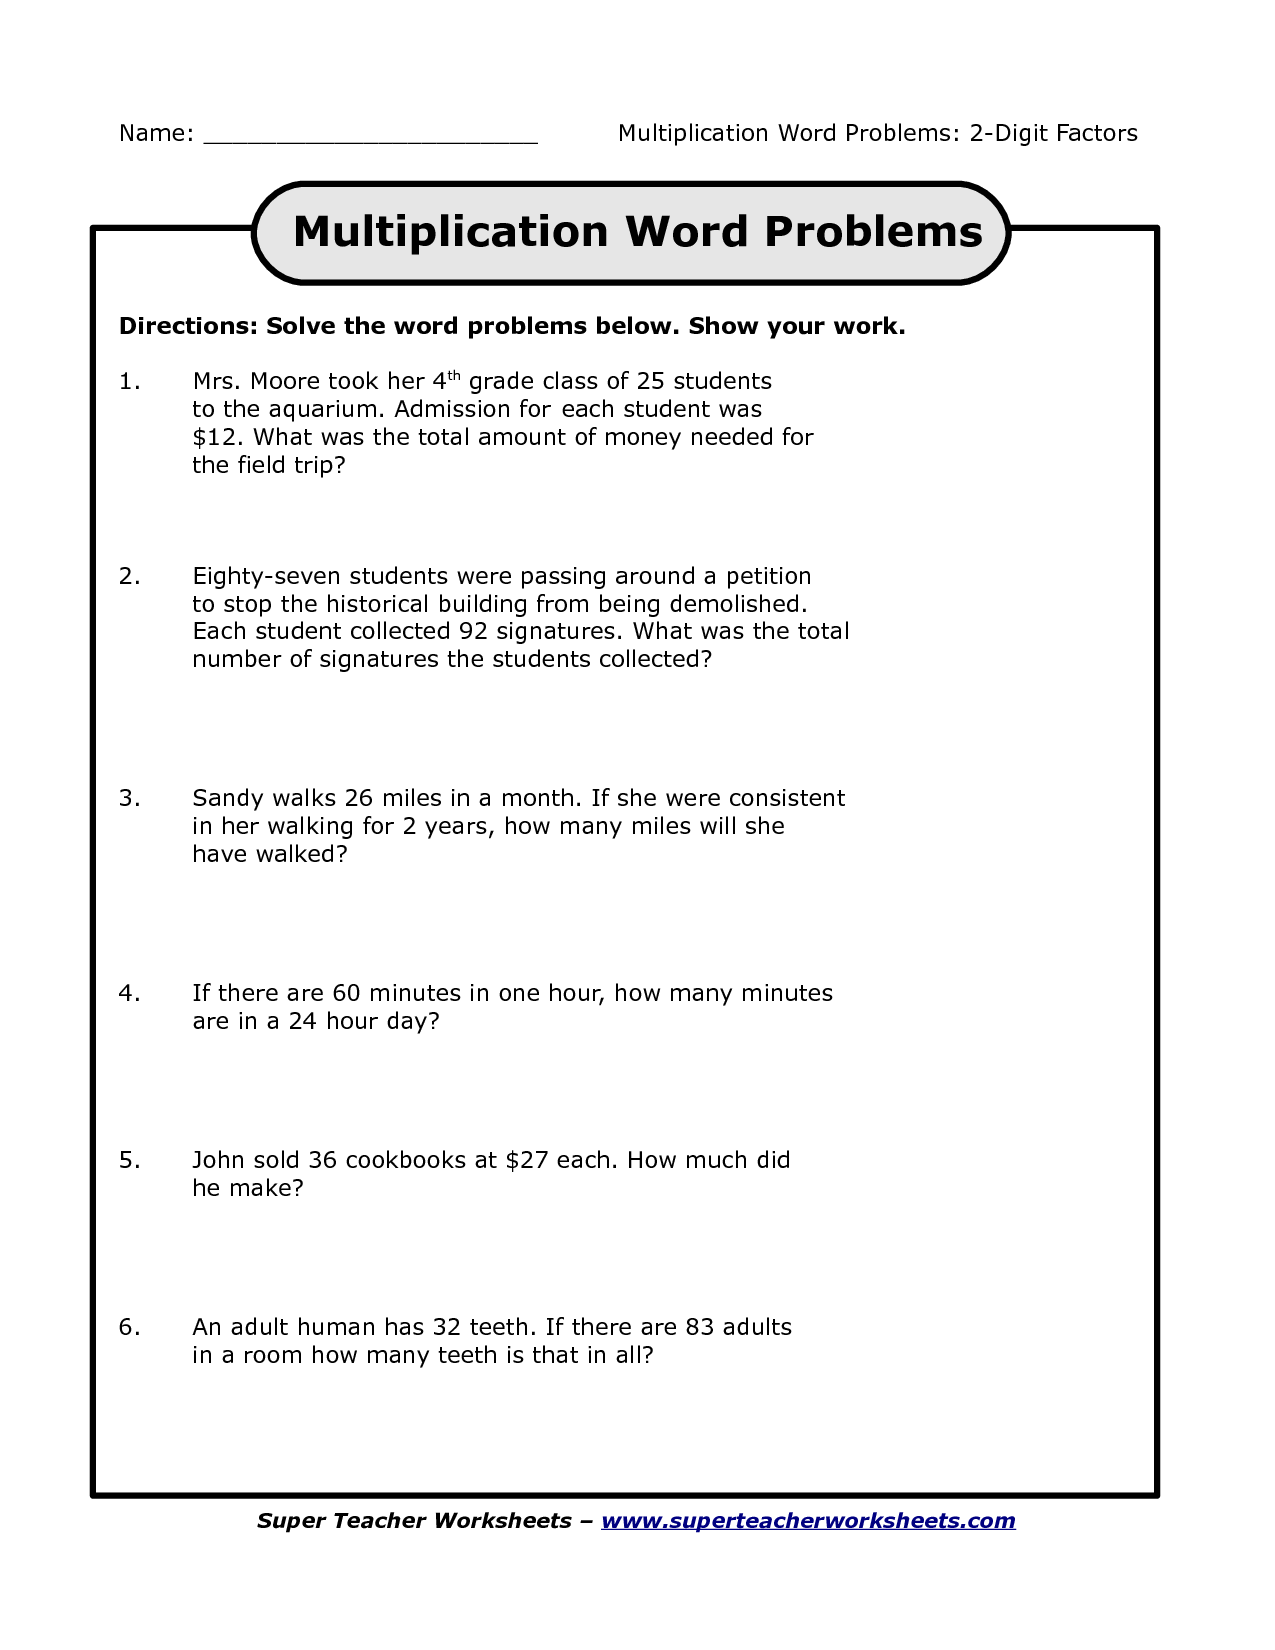 multiplication-and-division-word-problem-division-word-problems-with-division-facts-from-5-to